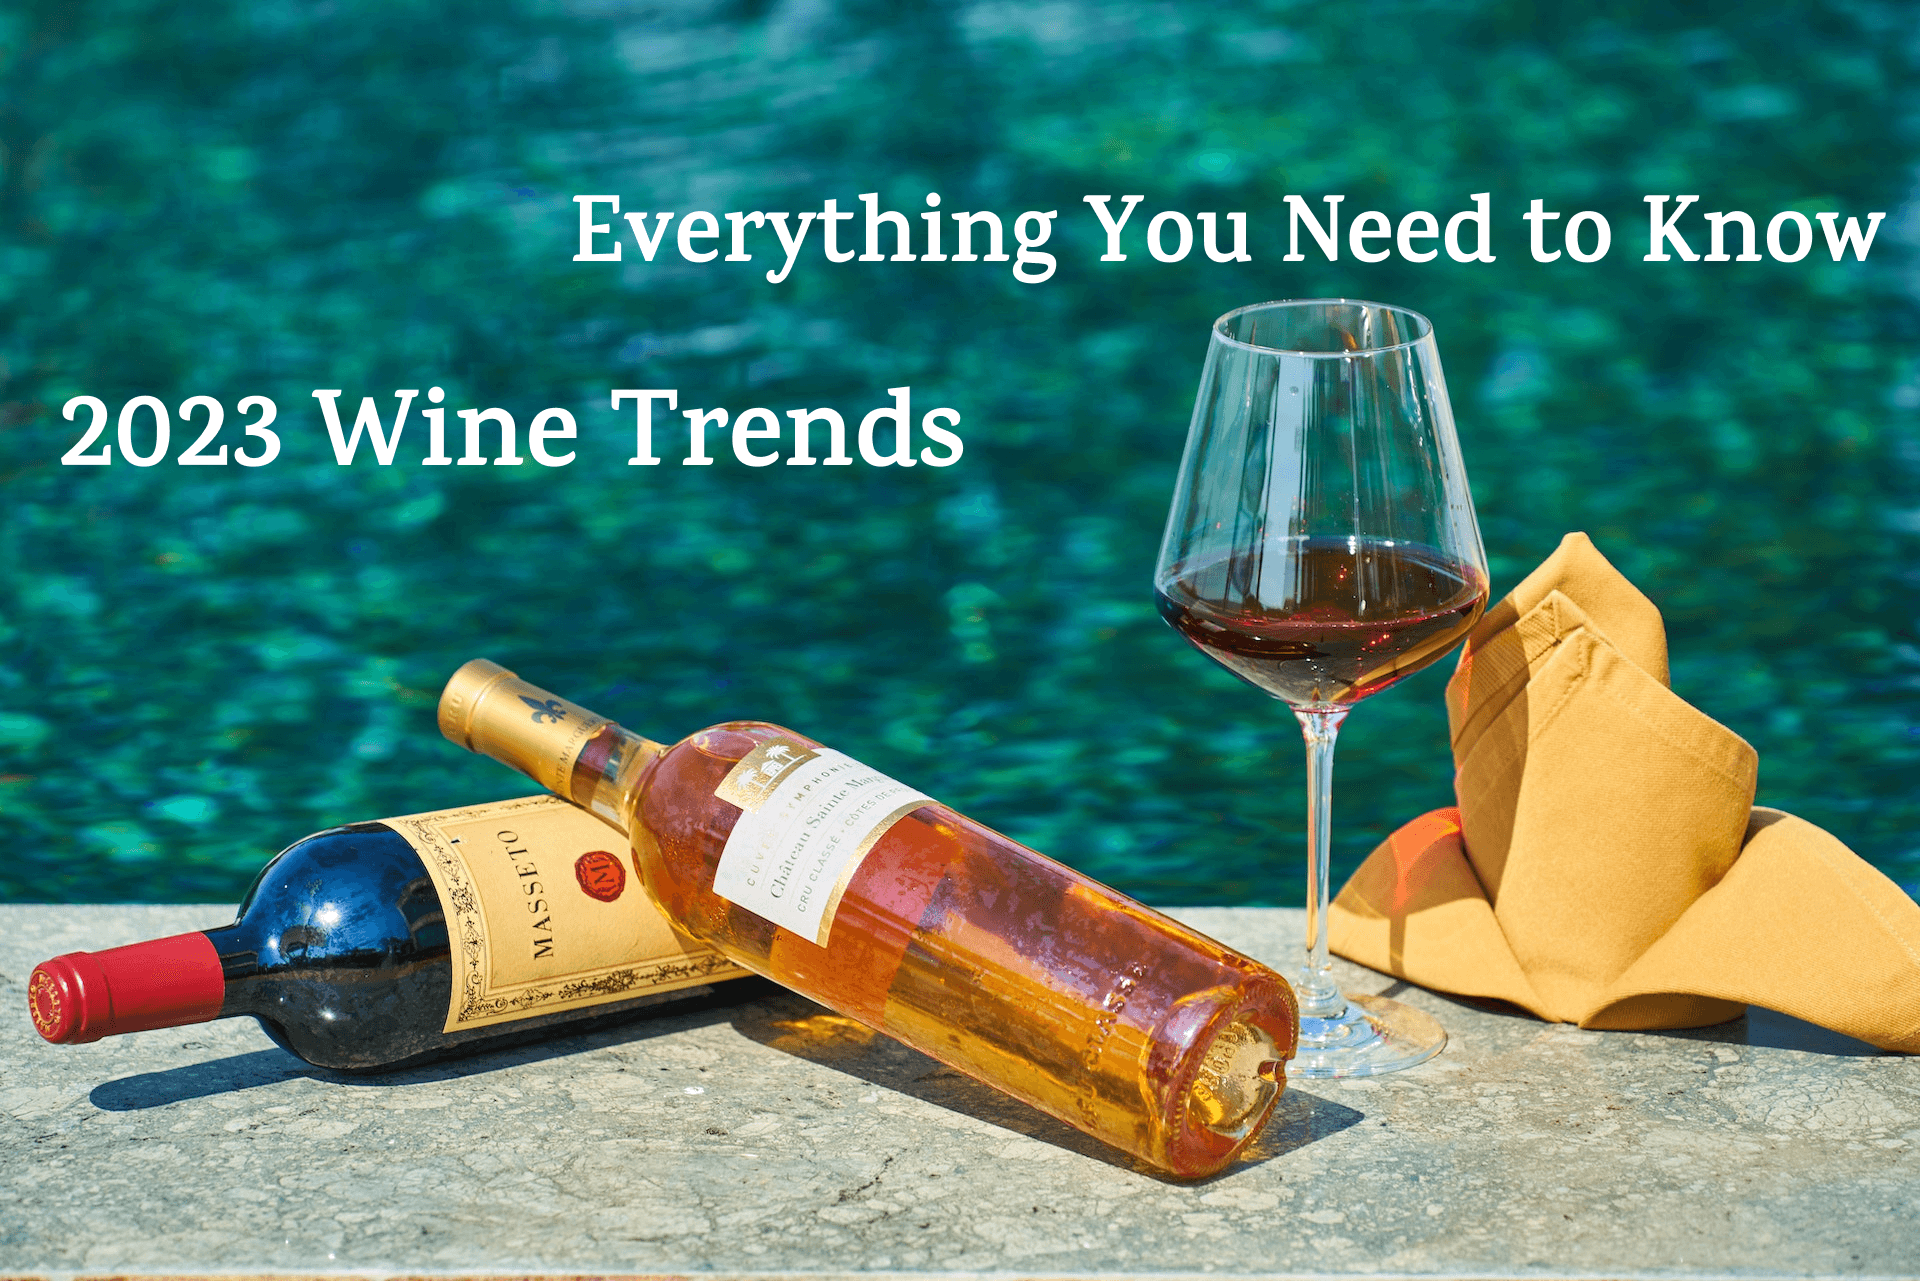 New Wine Trends That Are Coming in 2023